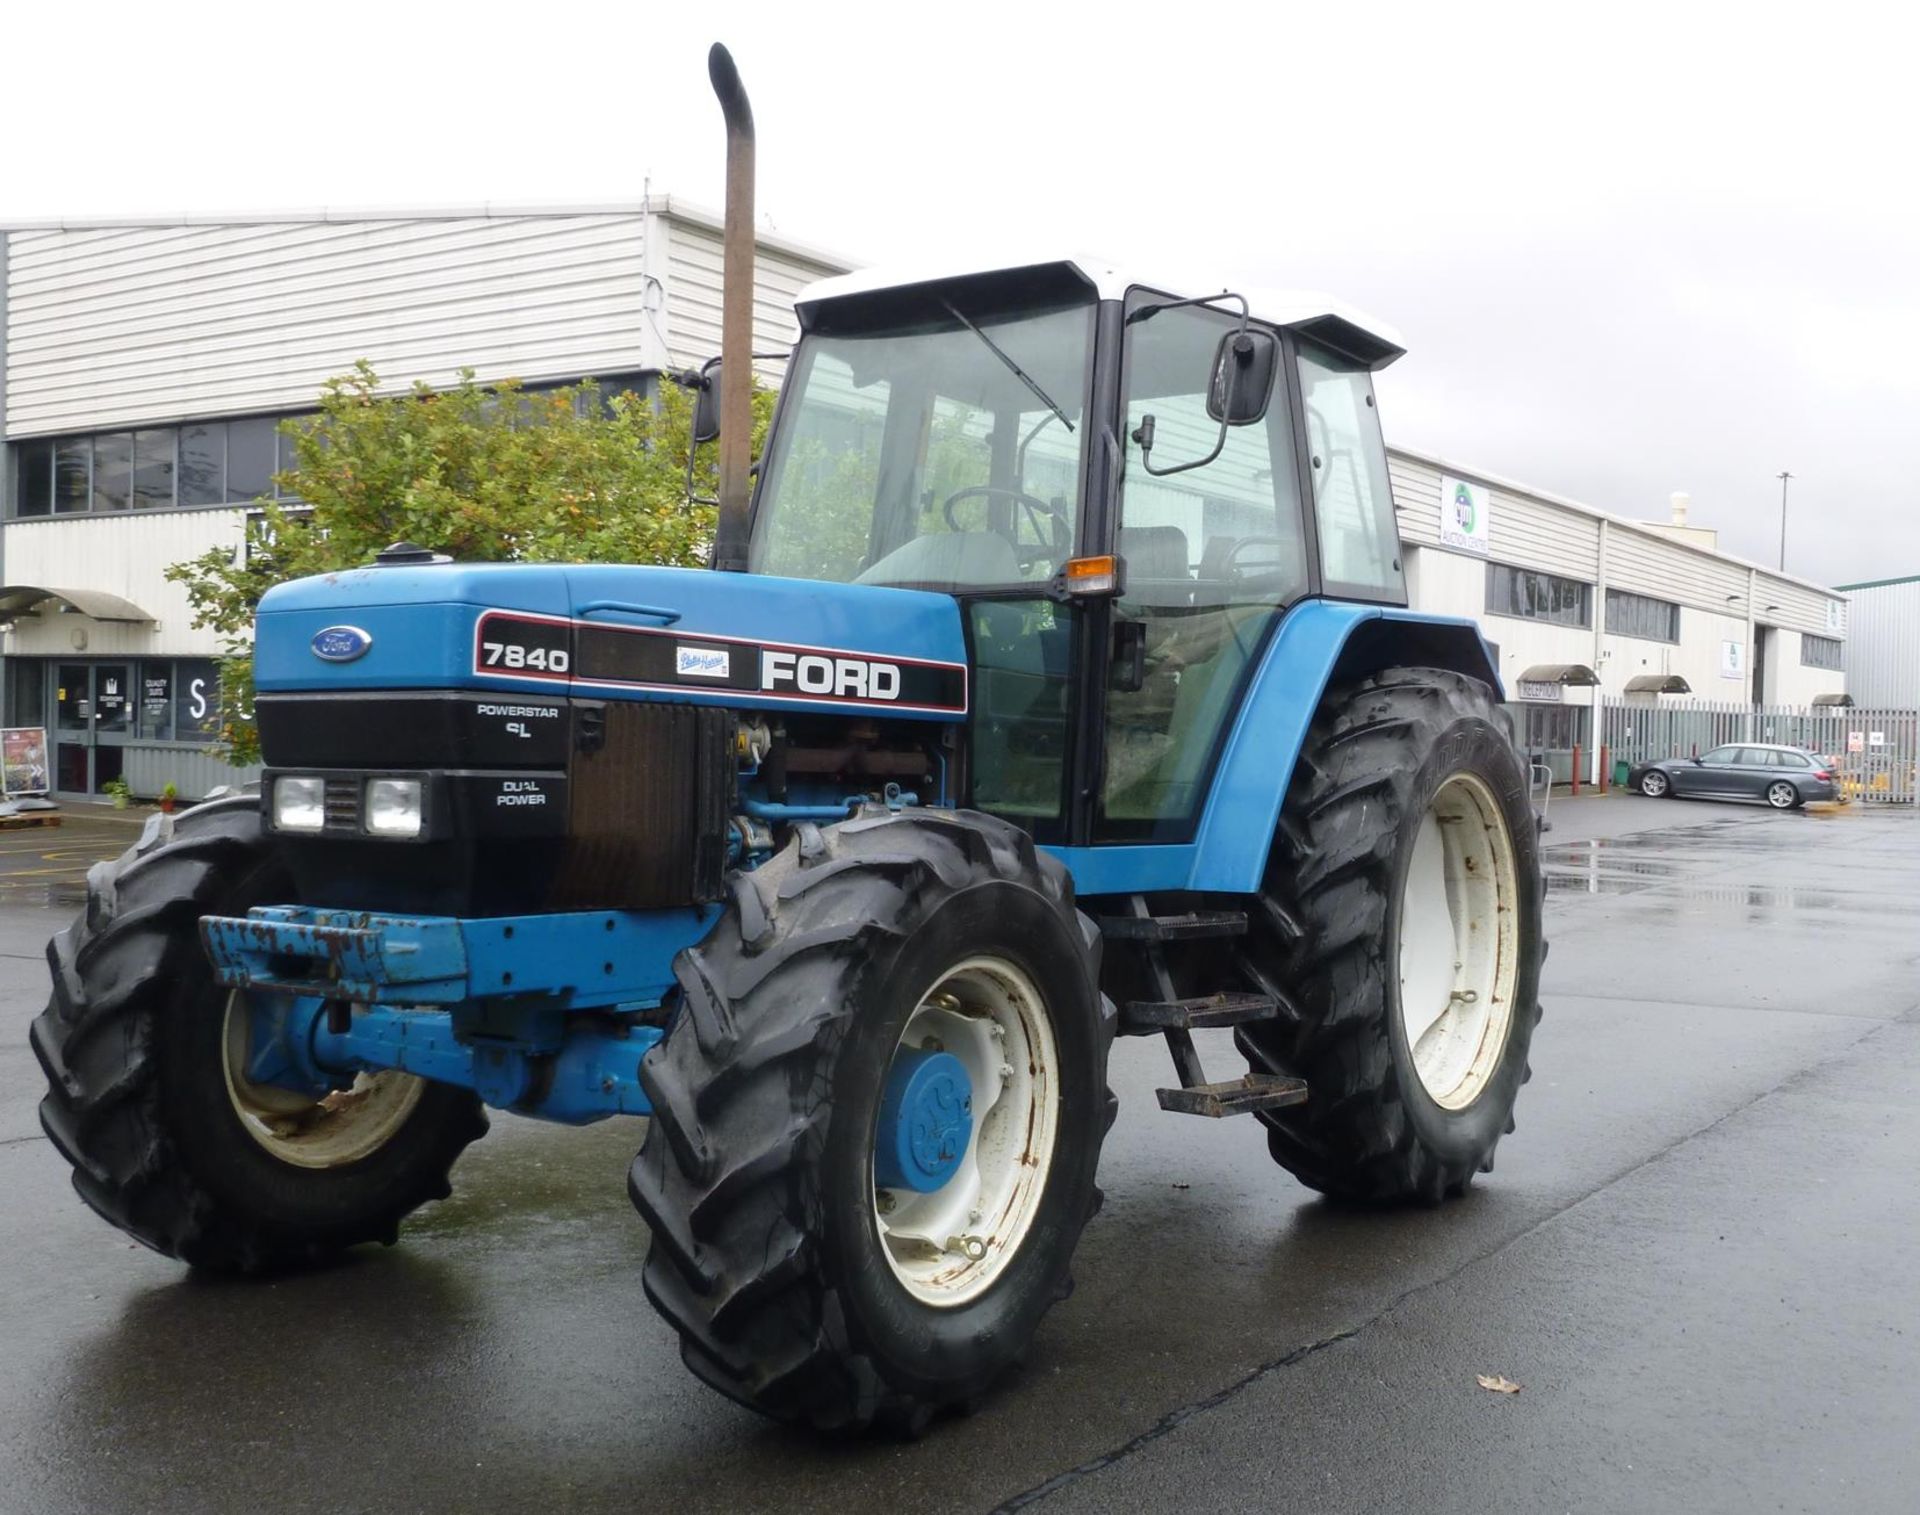 * 1993 Ford New Holland L557 VFE, 7840 4WD Powerstar SL Tractor. 5,597hrs Model No FE6PCG comes